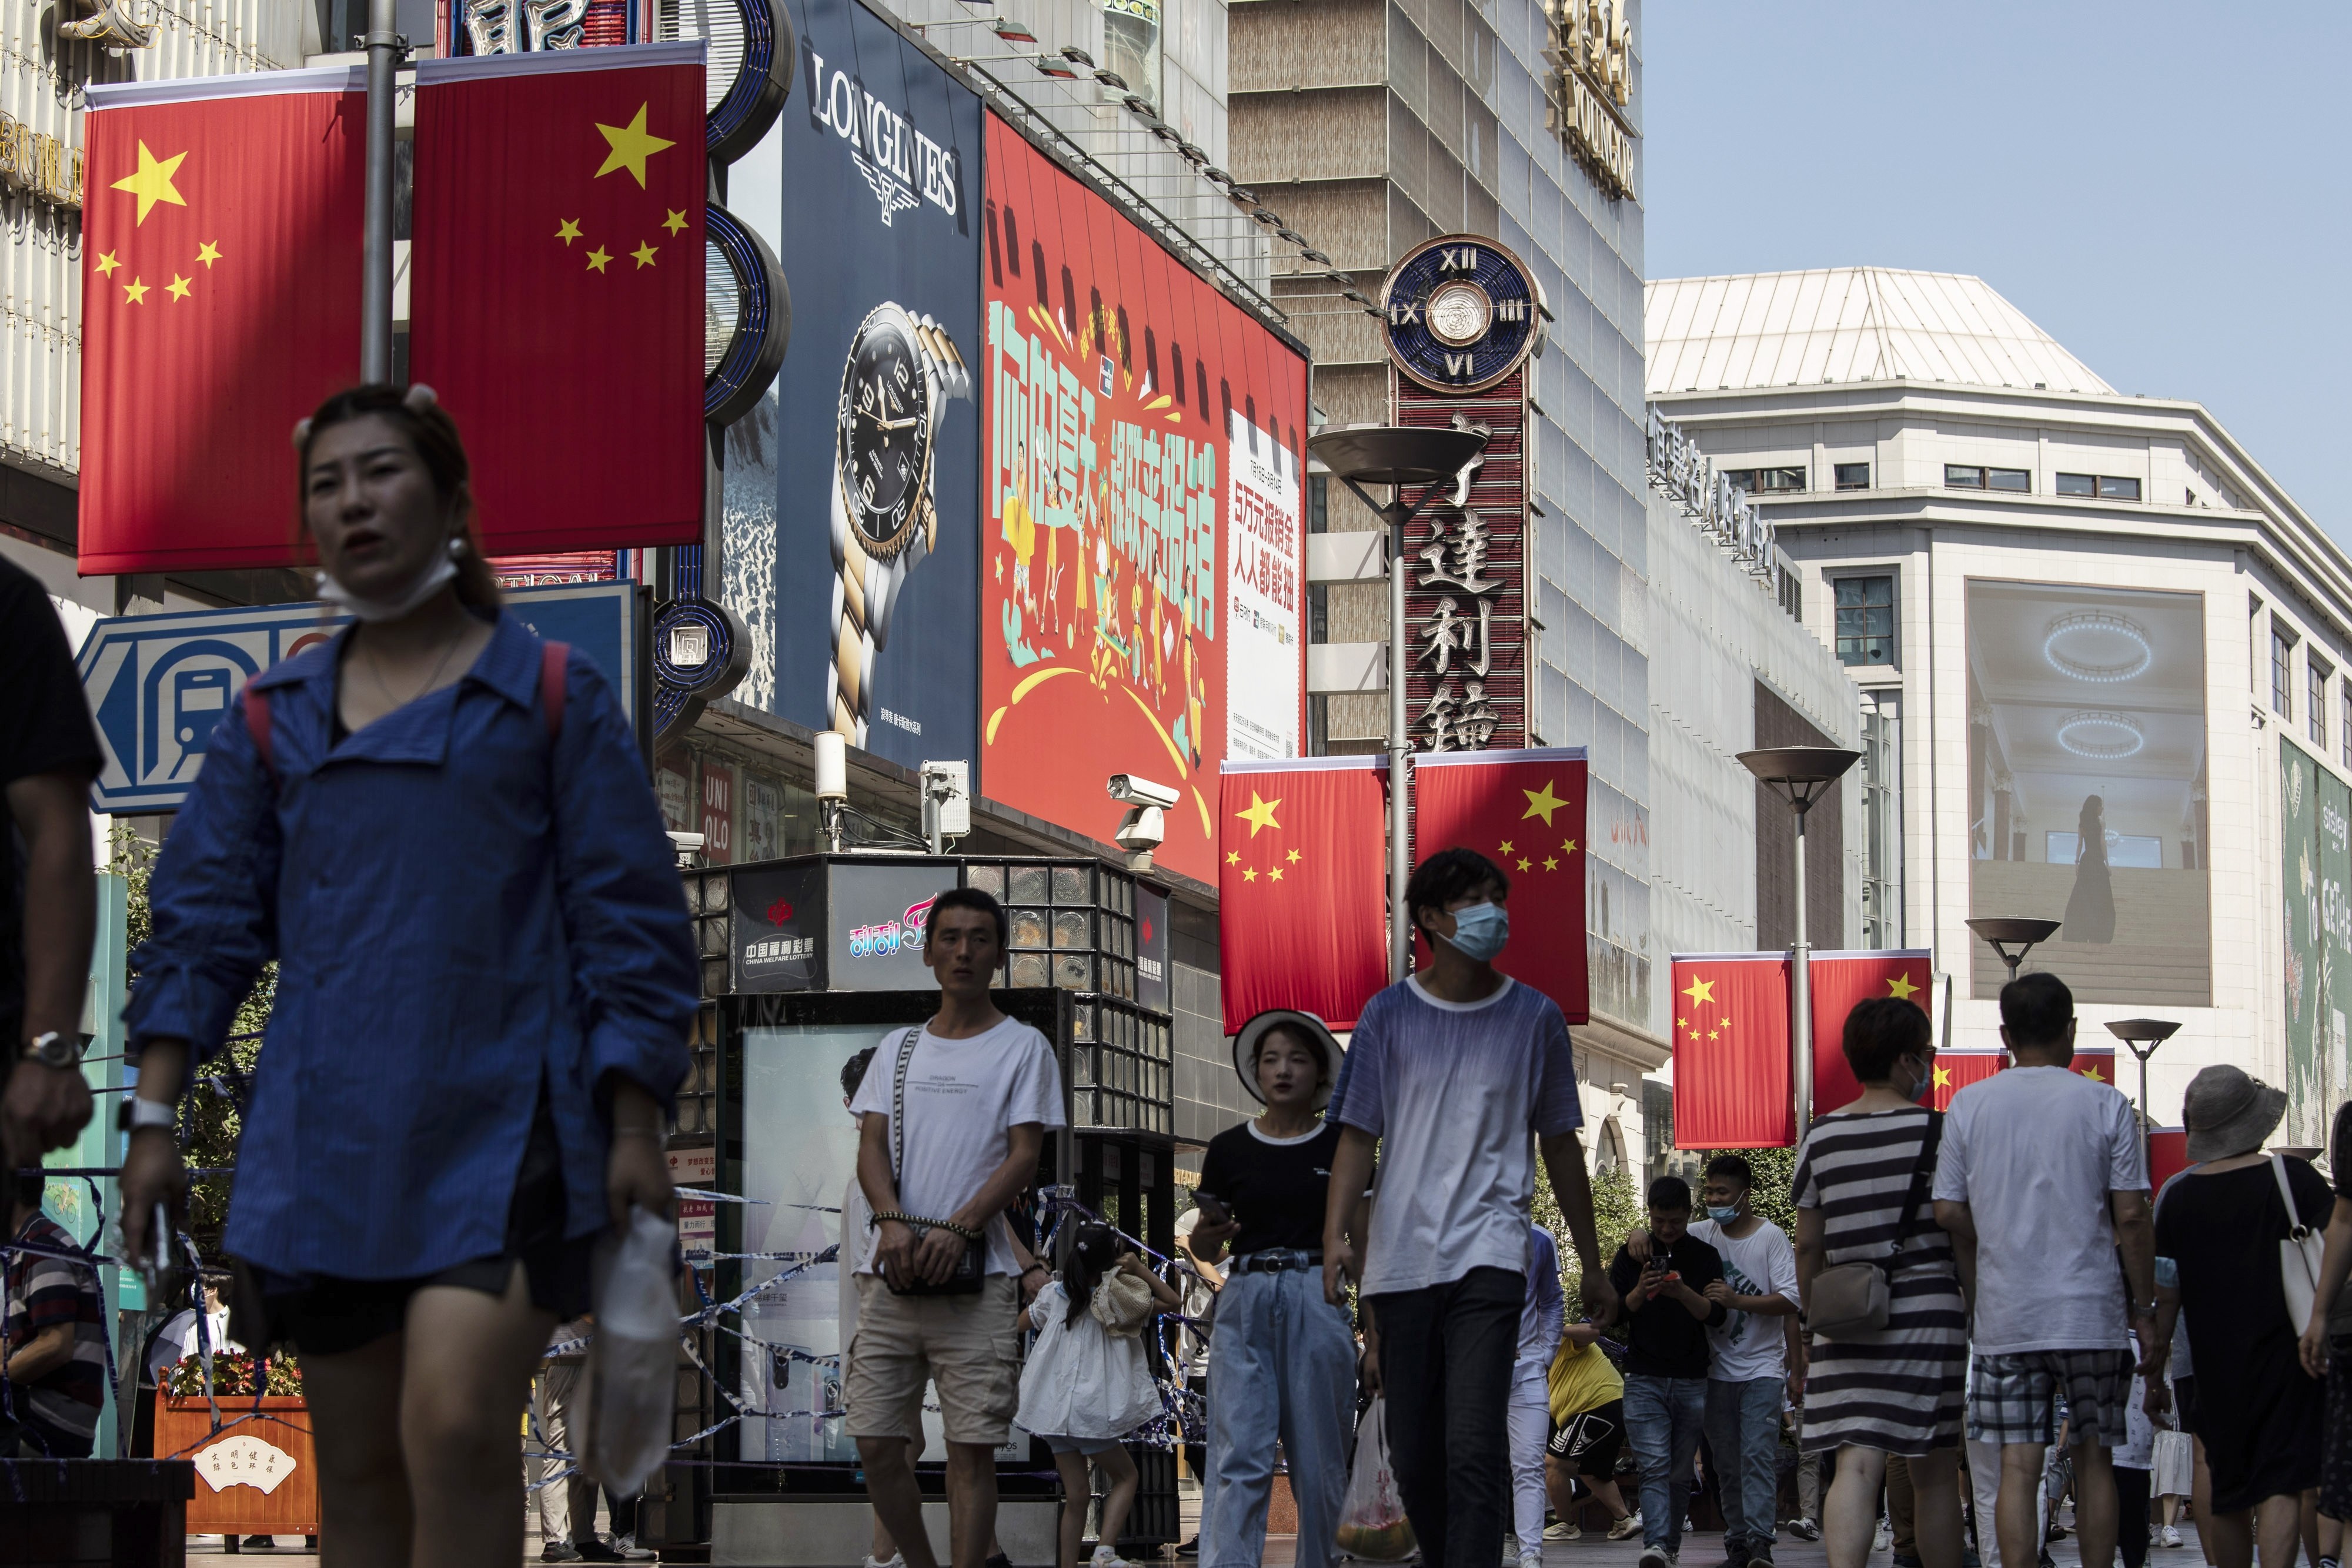 China had a population of 1.4126 billion at the end of last year, with the growth rate rising at the slowest pace since the 1950s. Photo: Bloomberg